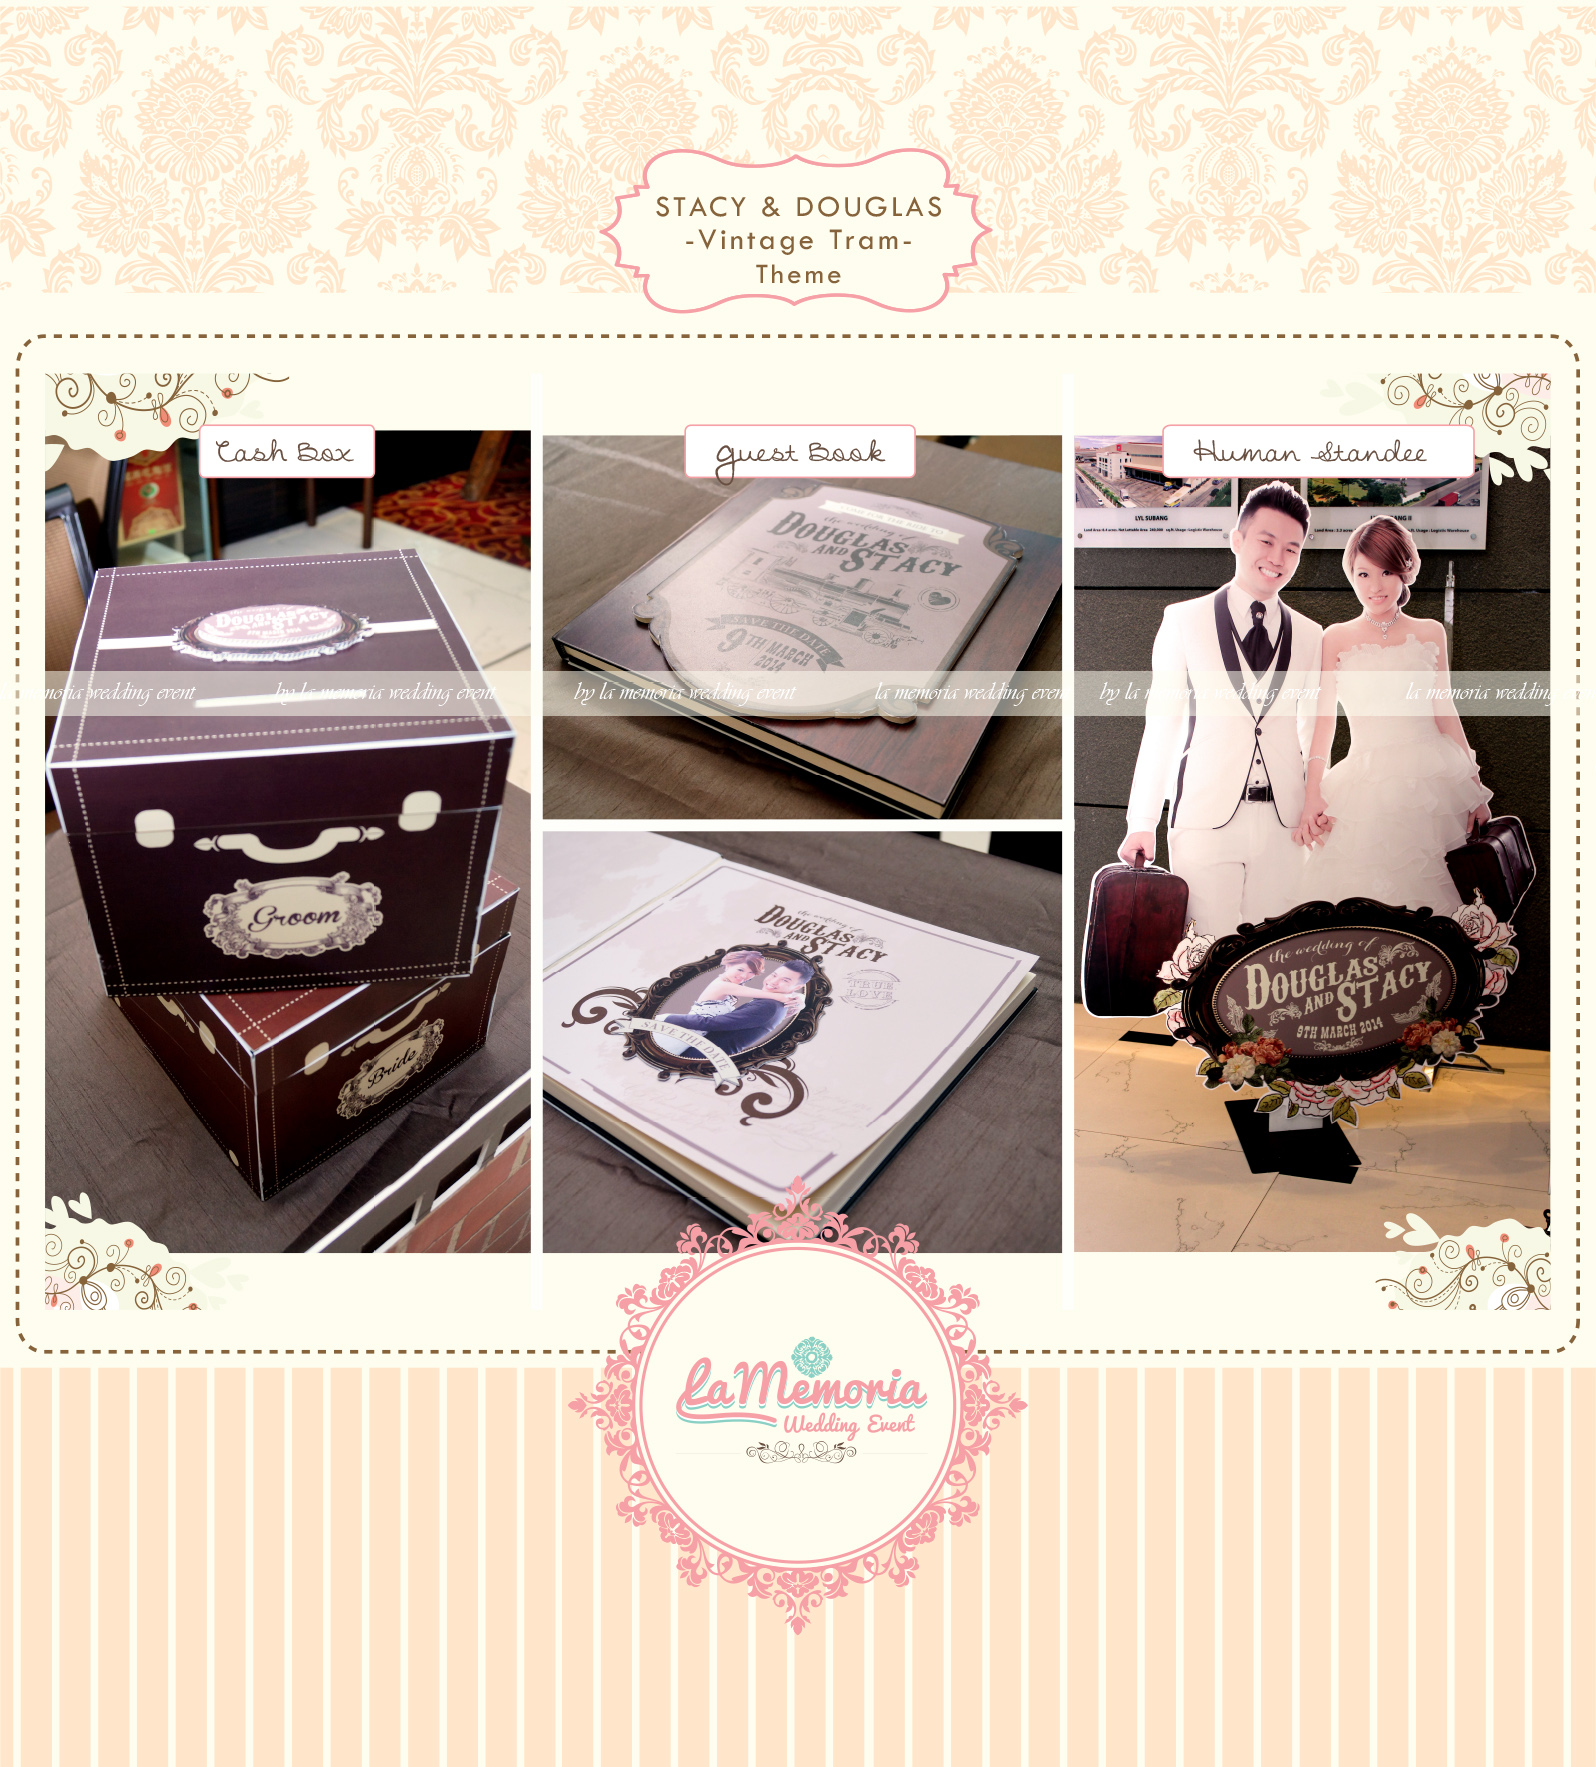 Theme: Vintage Train-Guestbook, Giant Standee & Cash Box